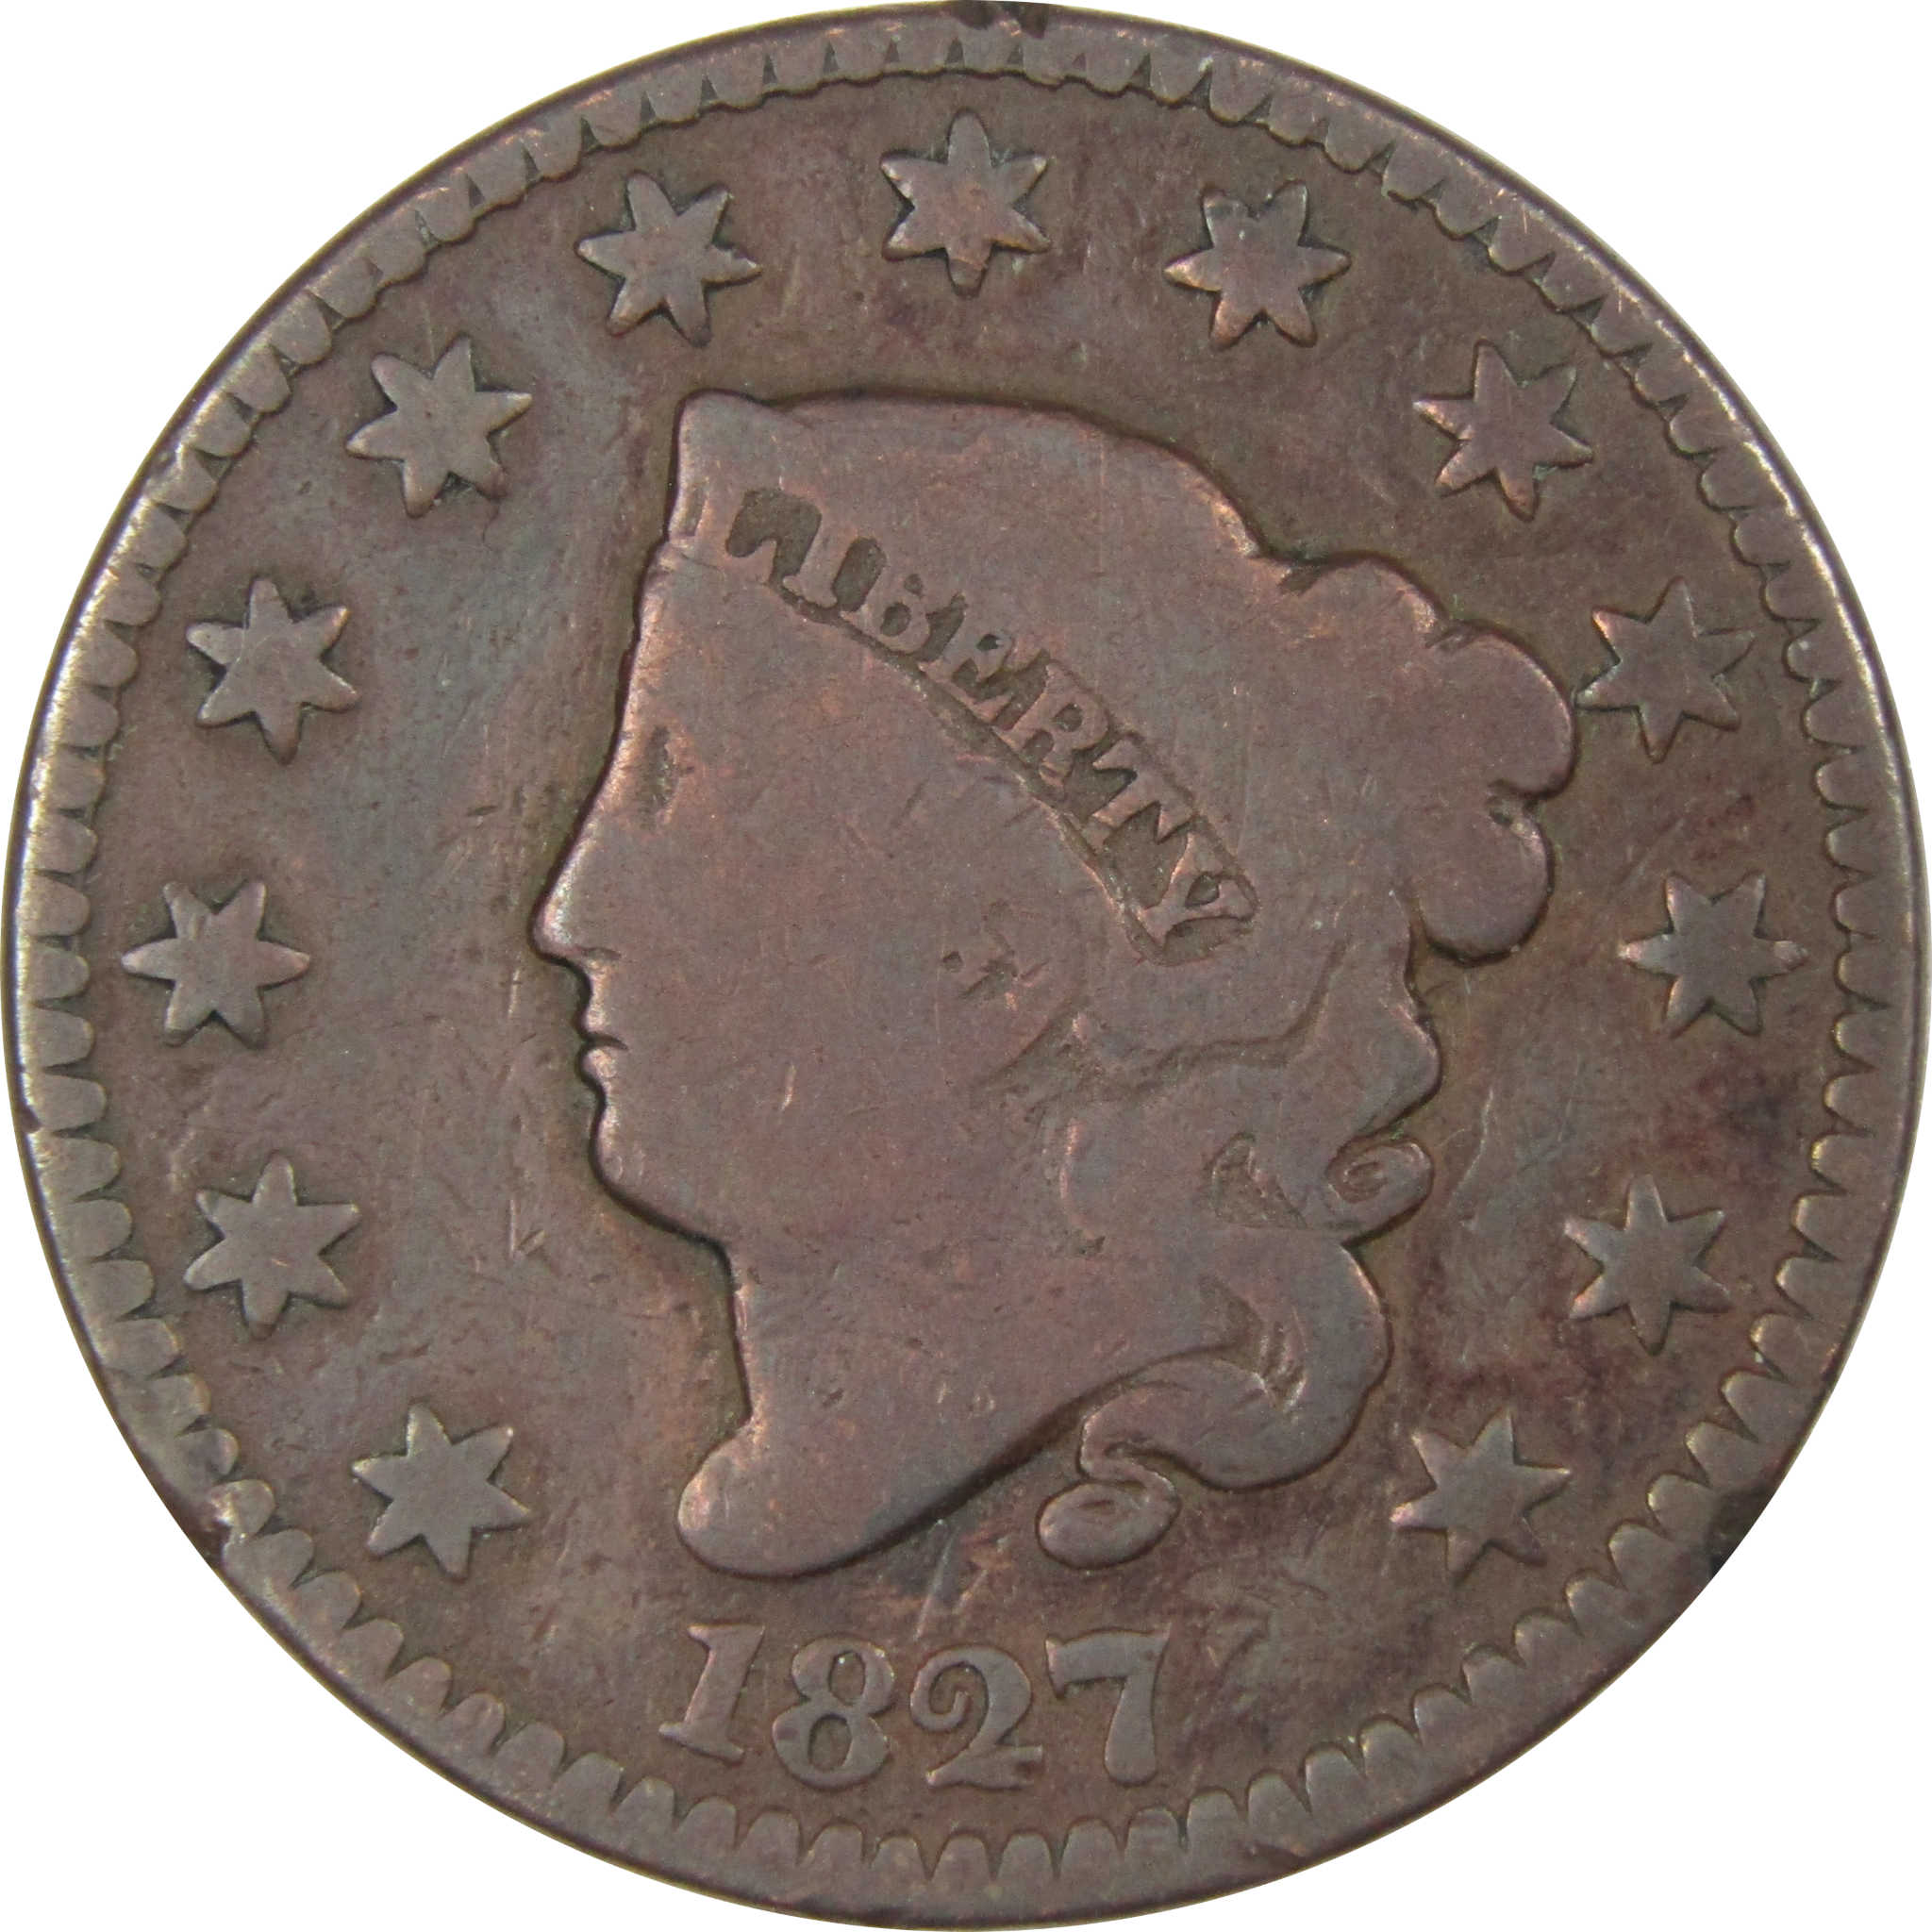 Historic Large Cents  Profile Coins & Collectibles